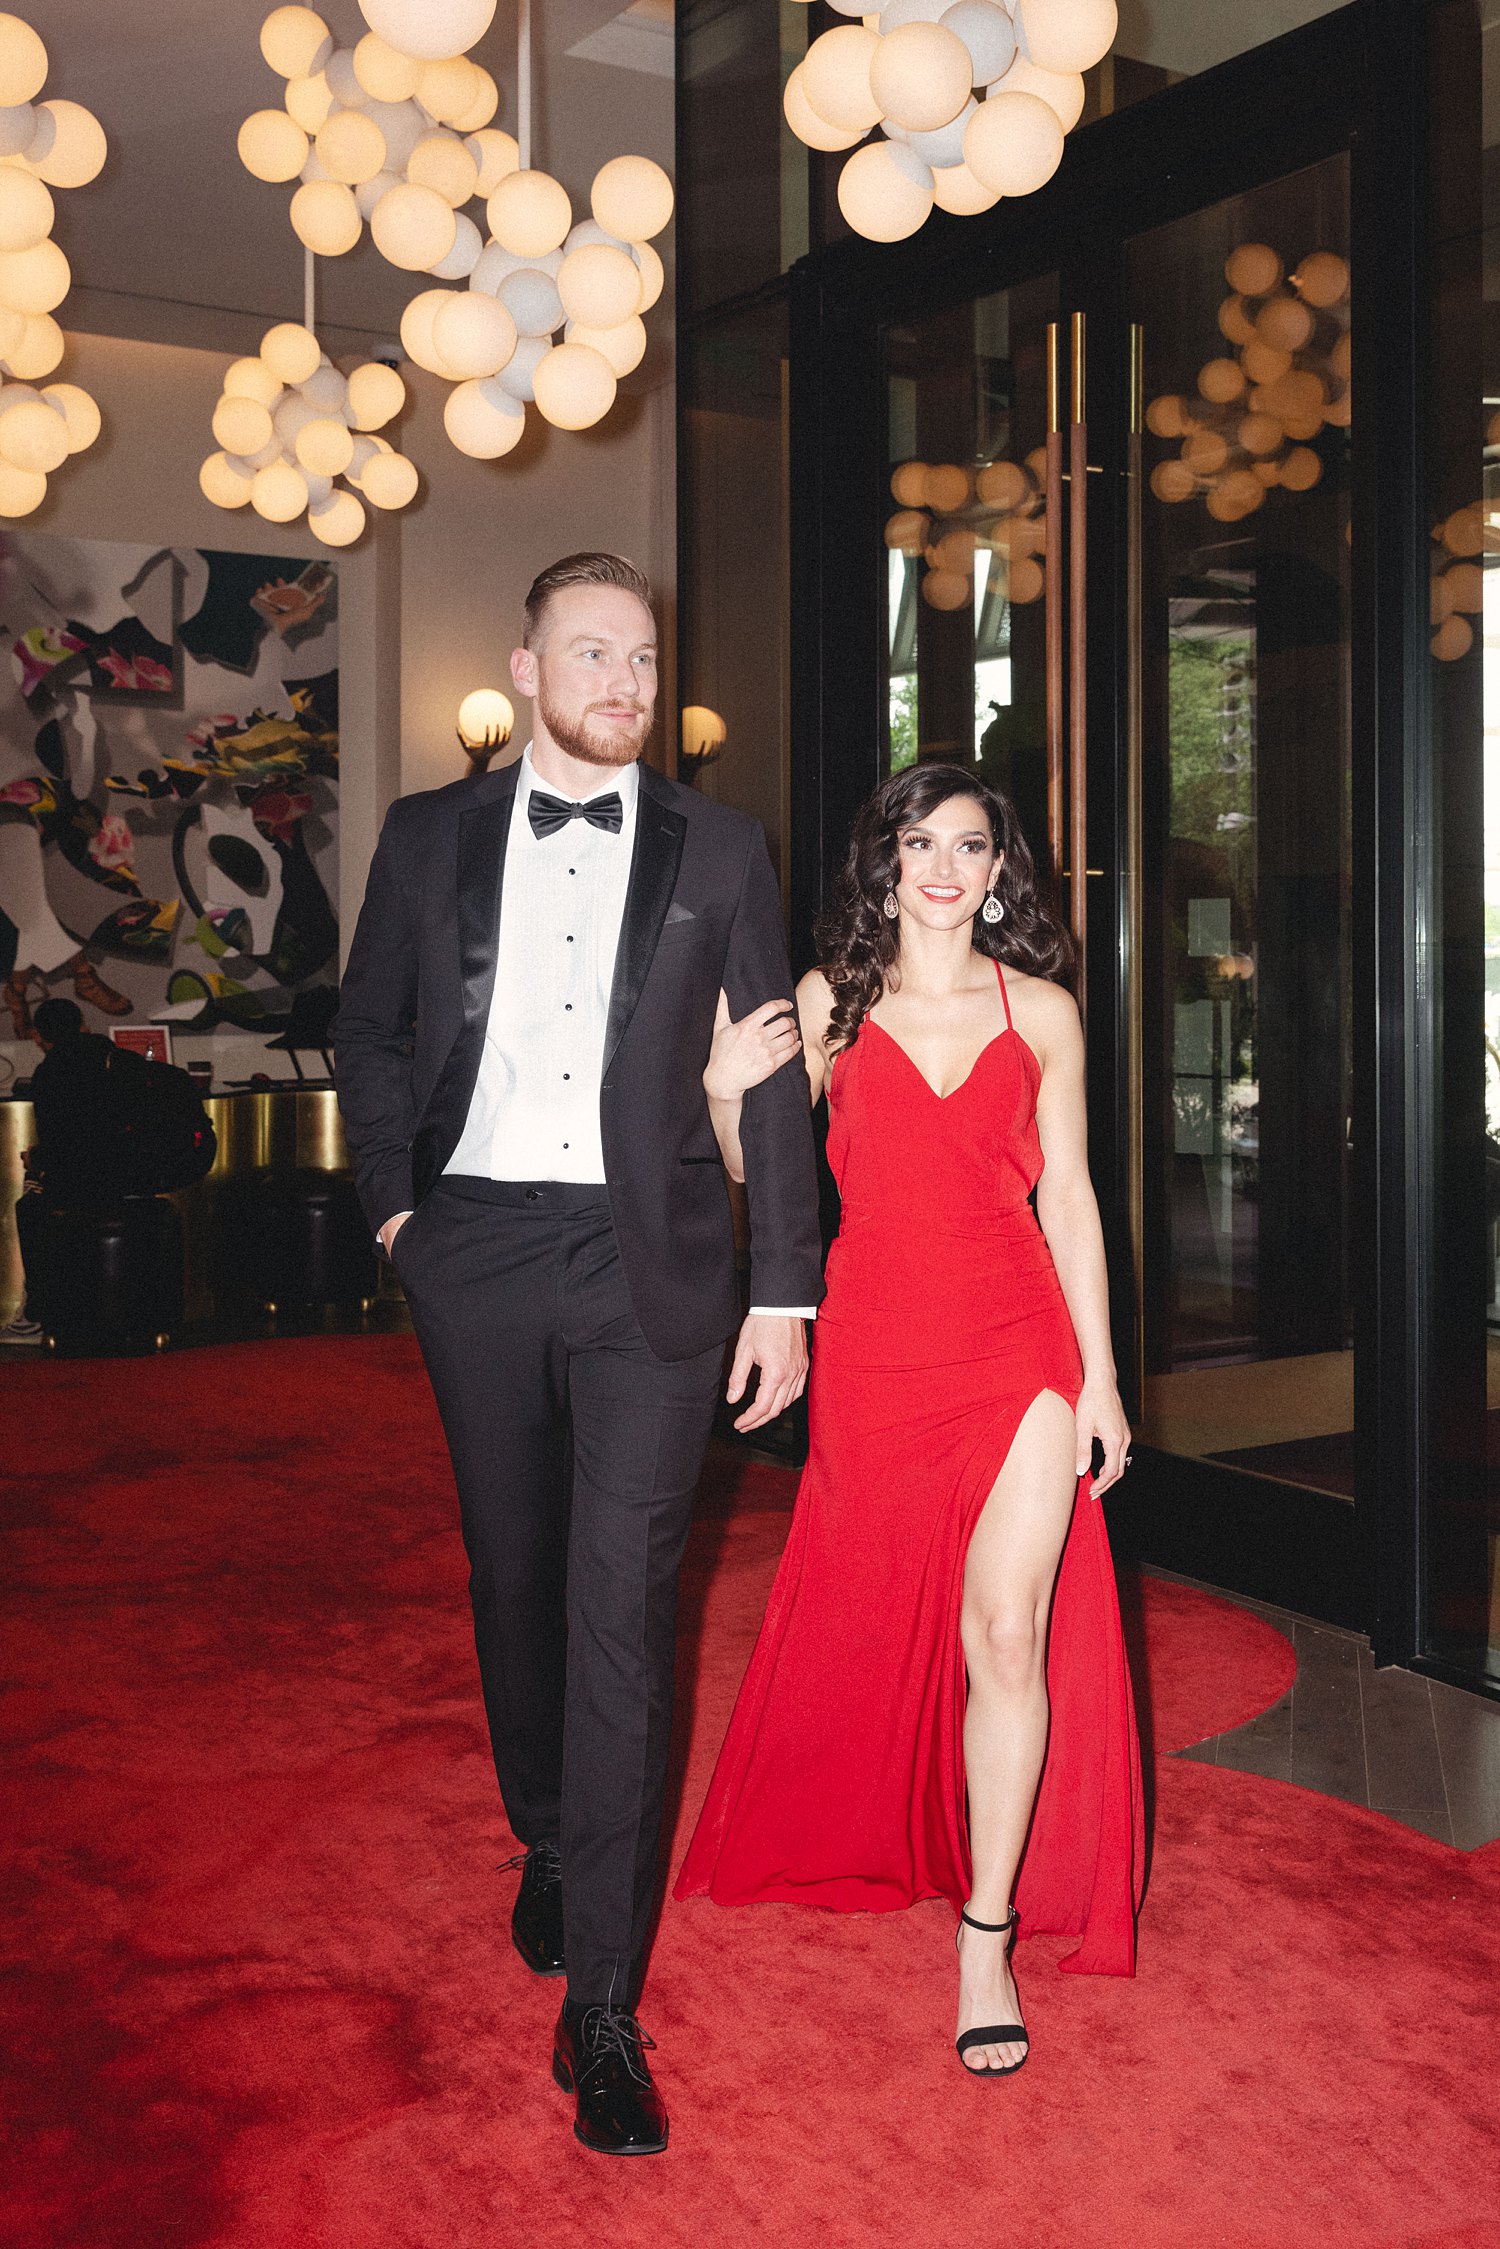 Woman in Red Dress and man in black tuxedo walking together into Virgin Hotel Dallas Engagement